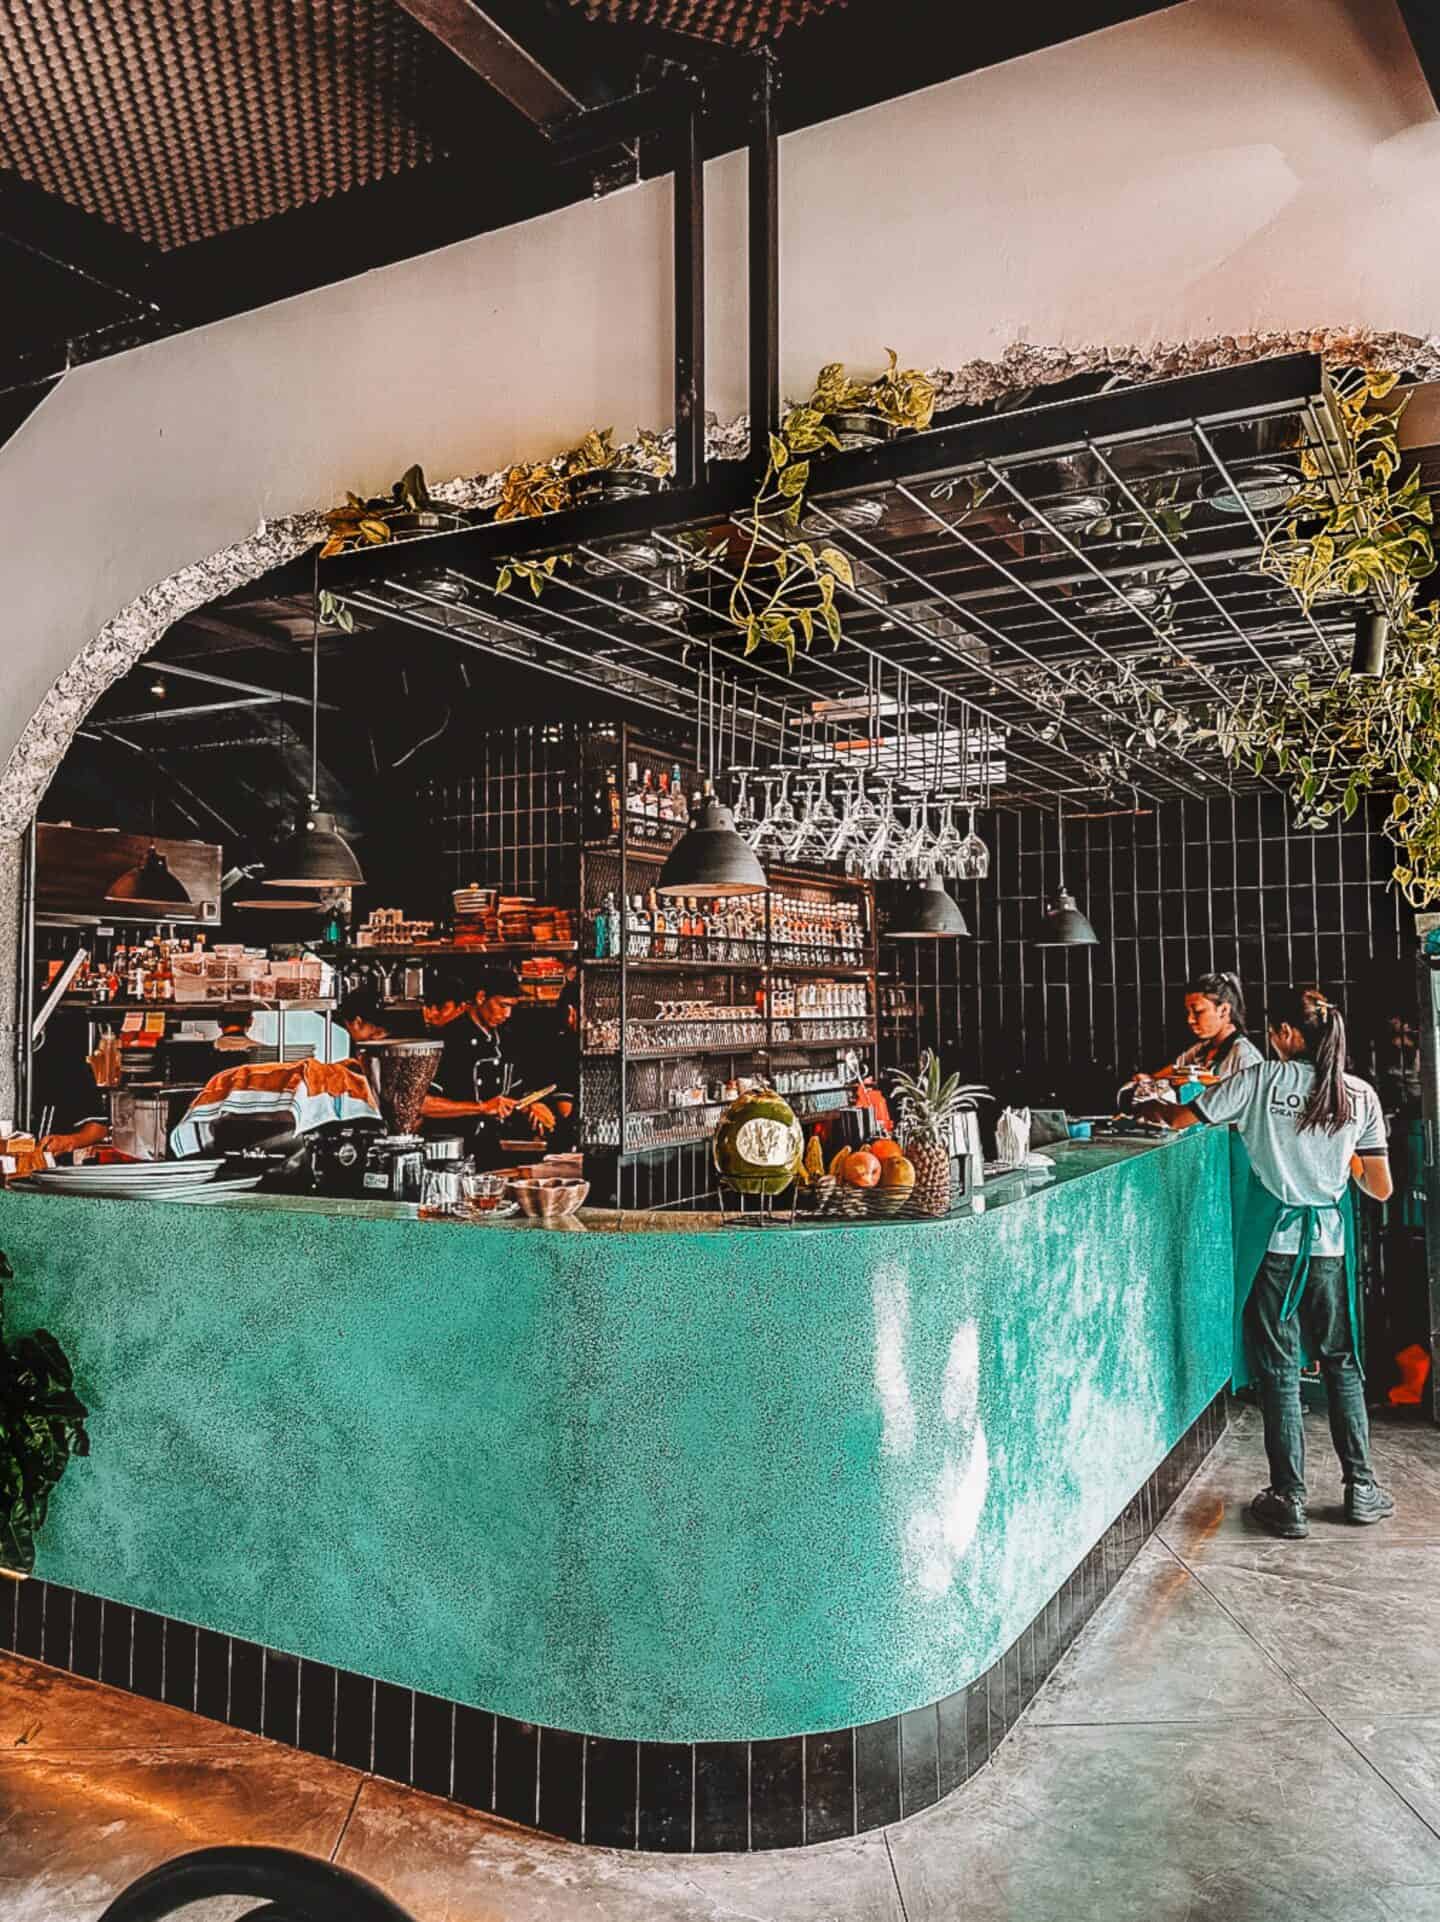 Visit LowCal Cheatery in Canggu for a delicious Bali brunch